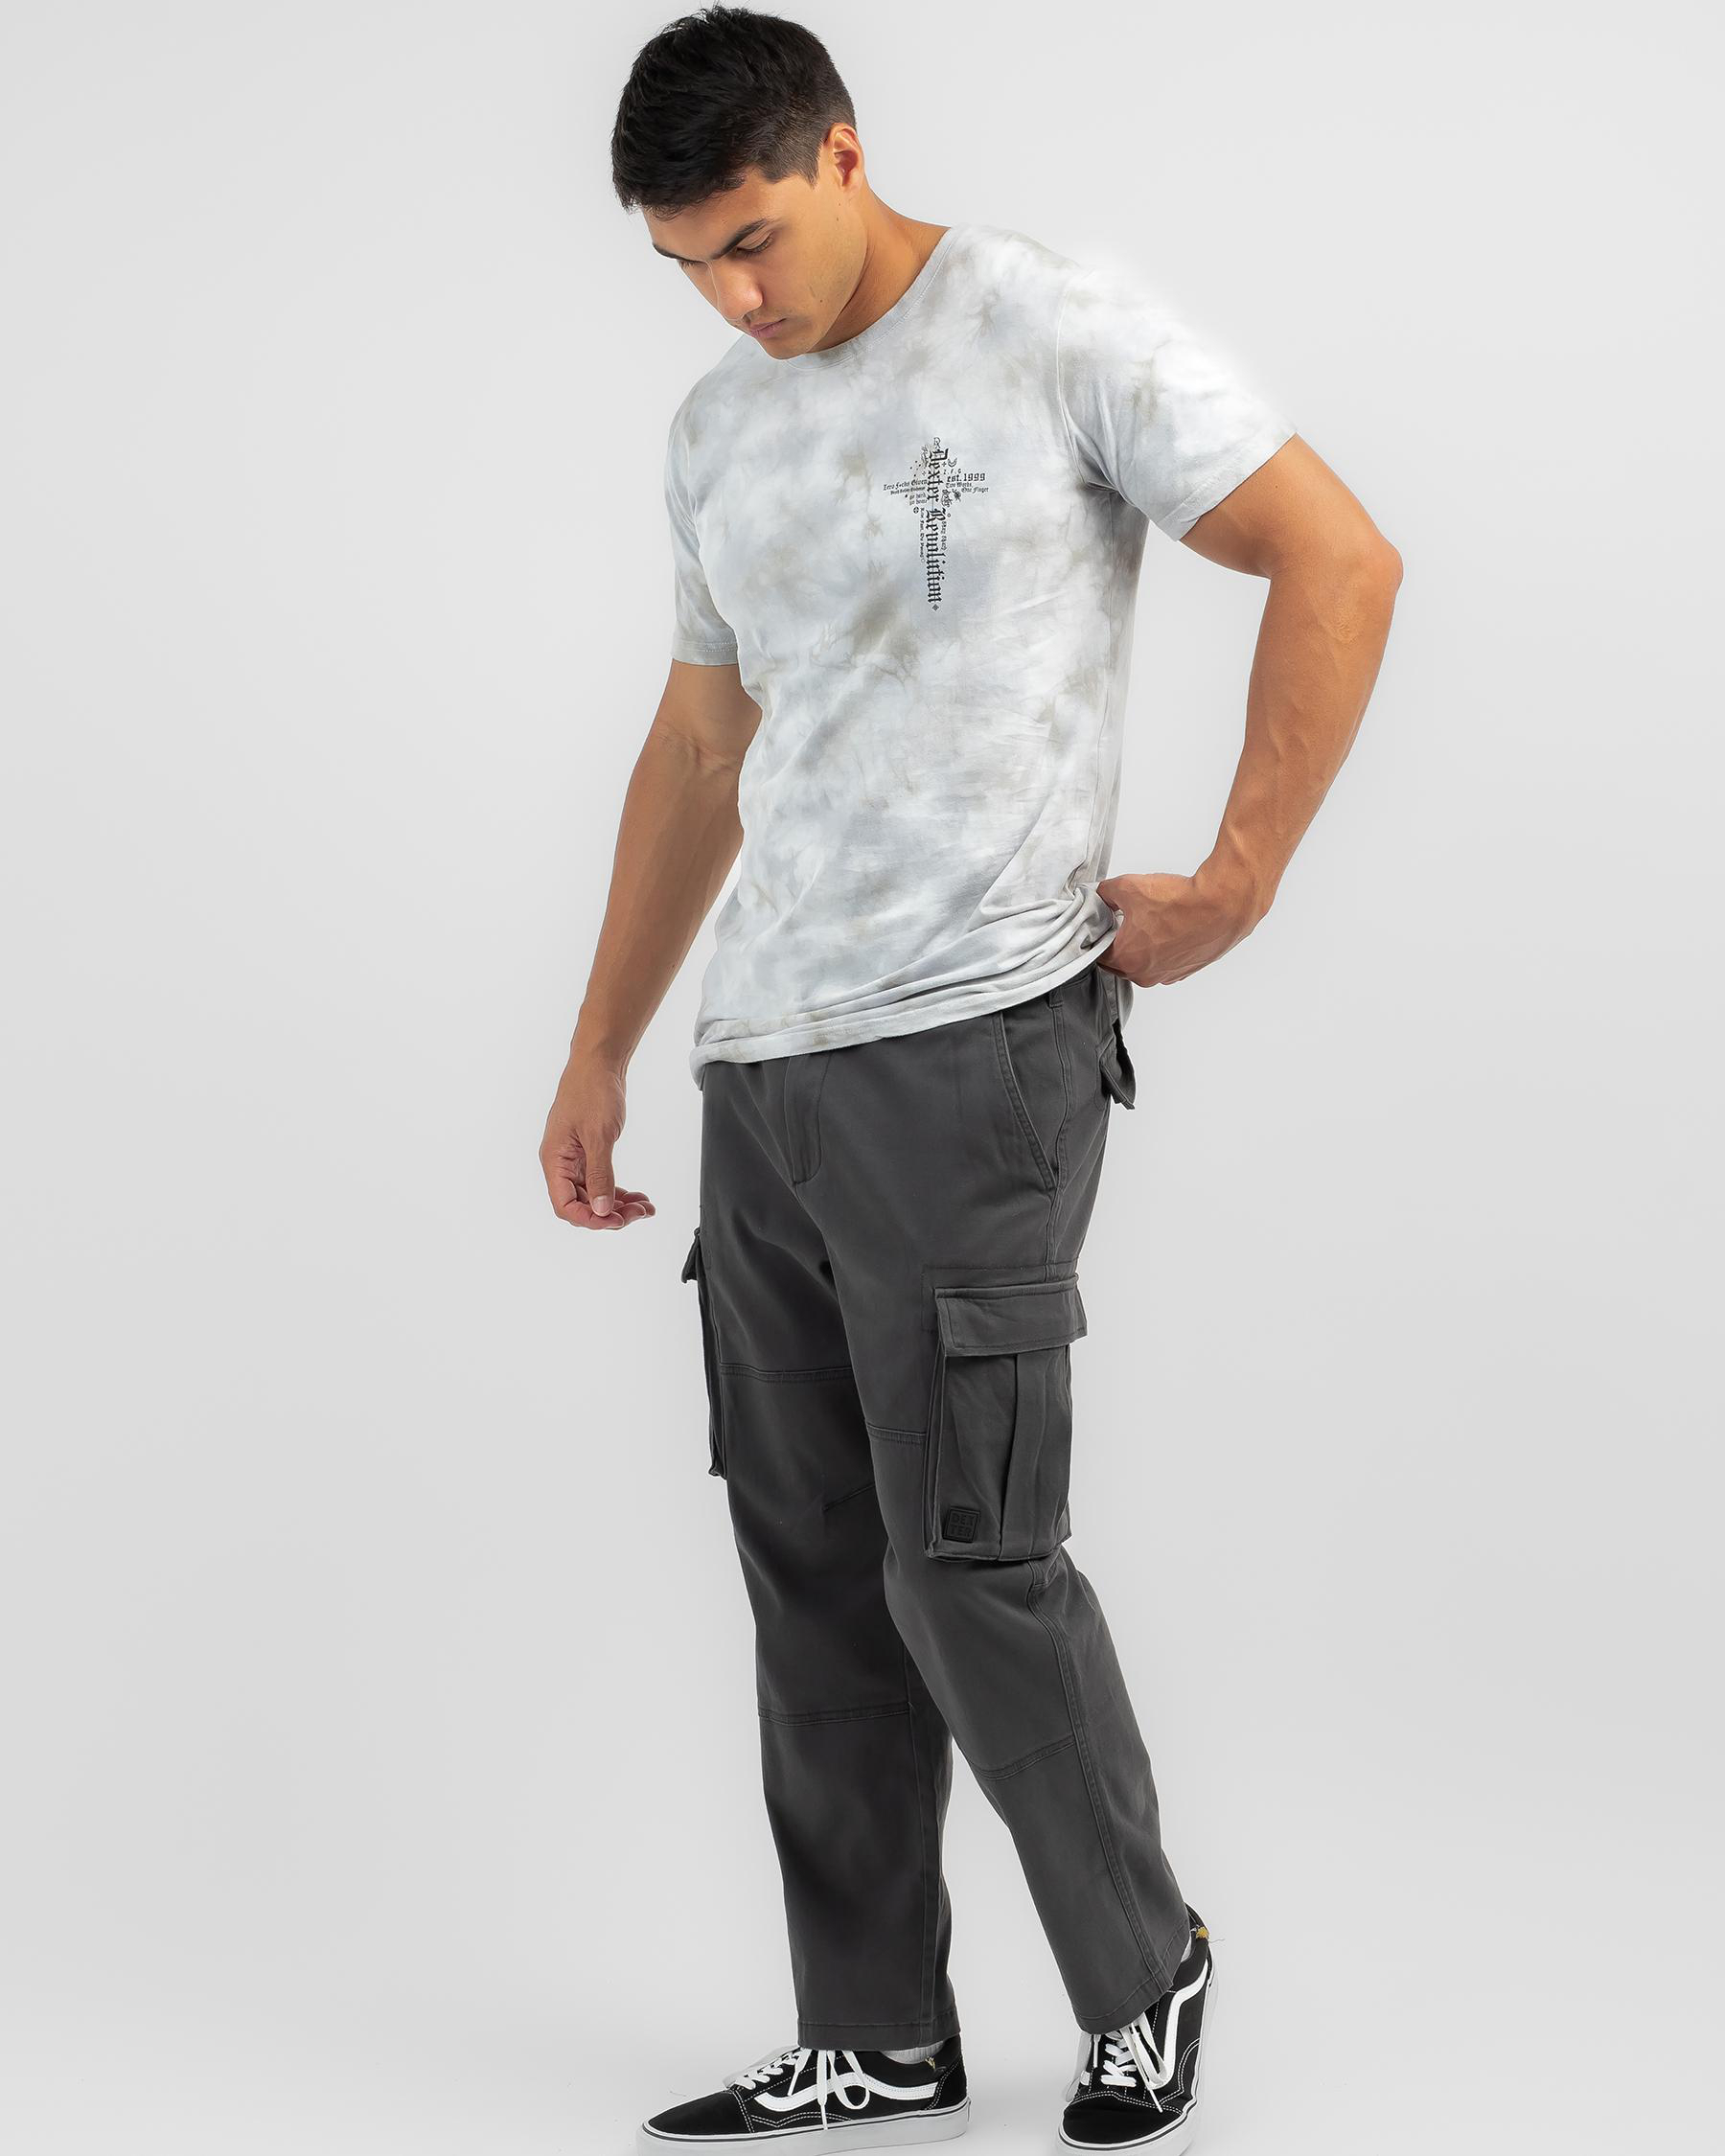 Shop Dexter Annihilate Cargo Pants In Charcoal - Fast Shipping & Easy ...